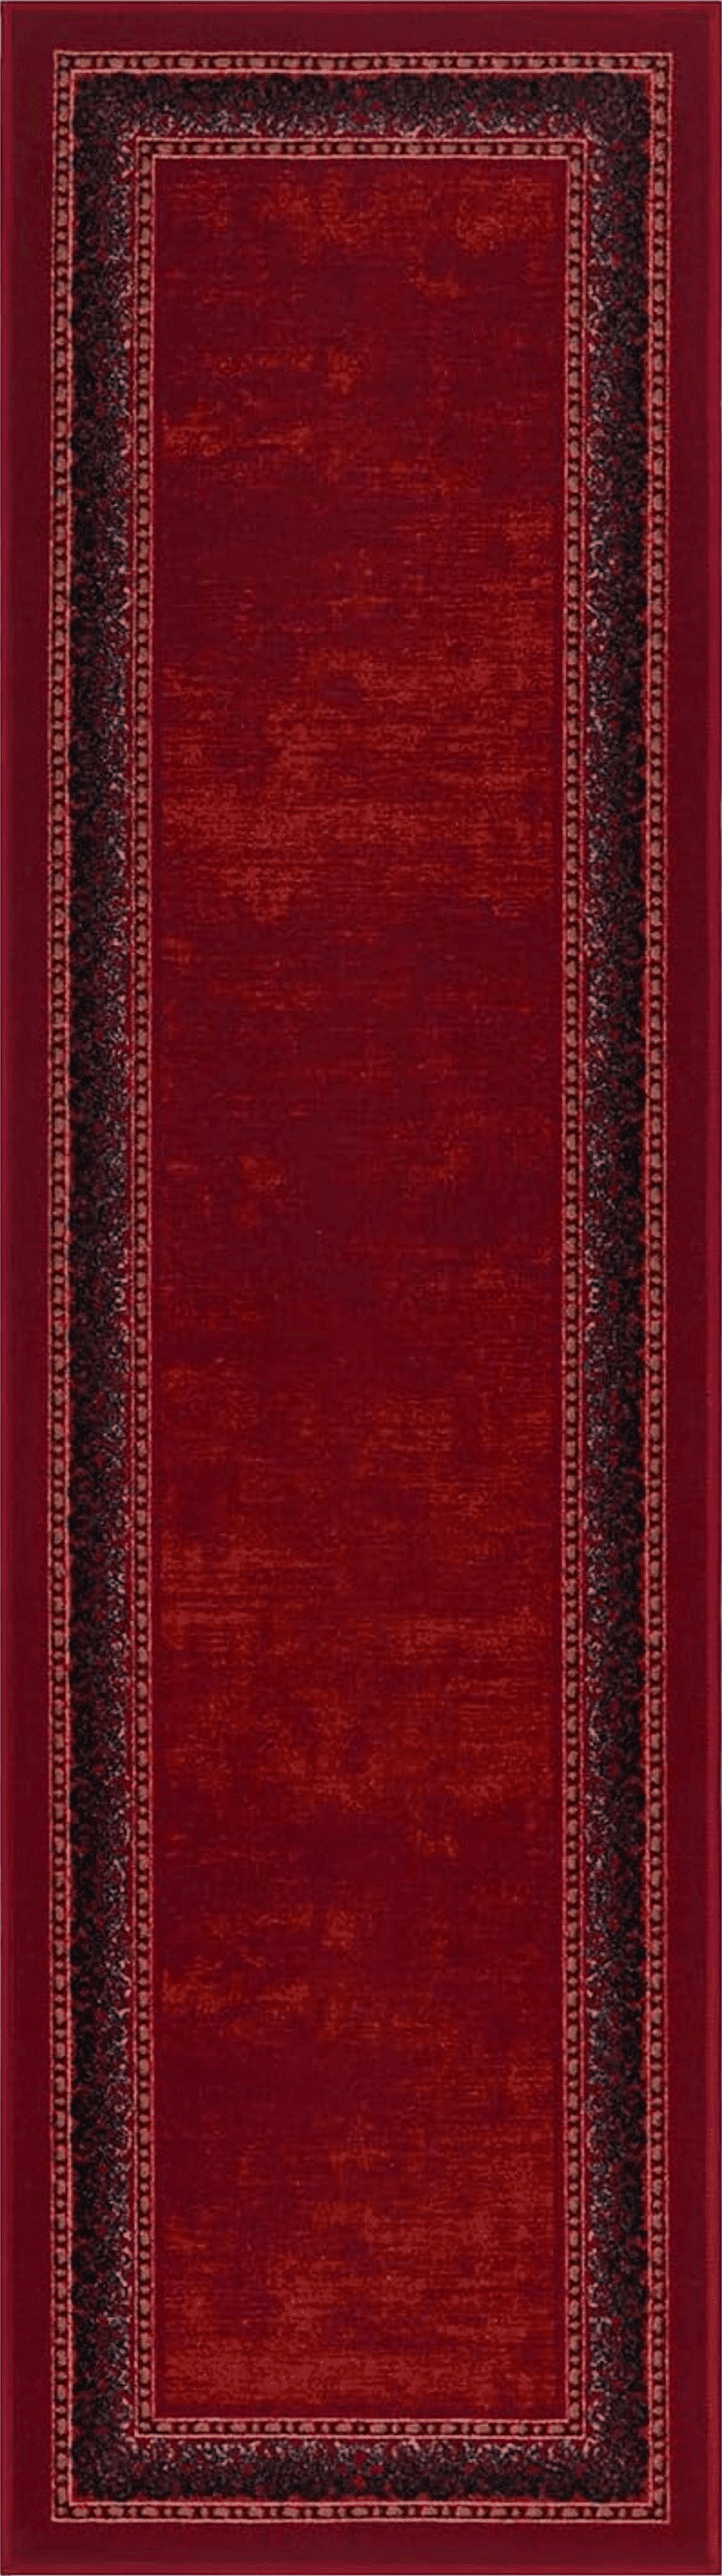 Turkish Antep Rugs Alfombras Bordered Modern 2x5 Non-Slip (Non-Skid) Low Pile Rubber Backing Kitchen Area Runner Rug (Maroon Red, 2' x 5')